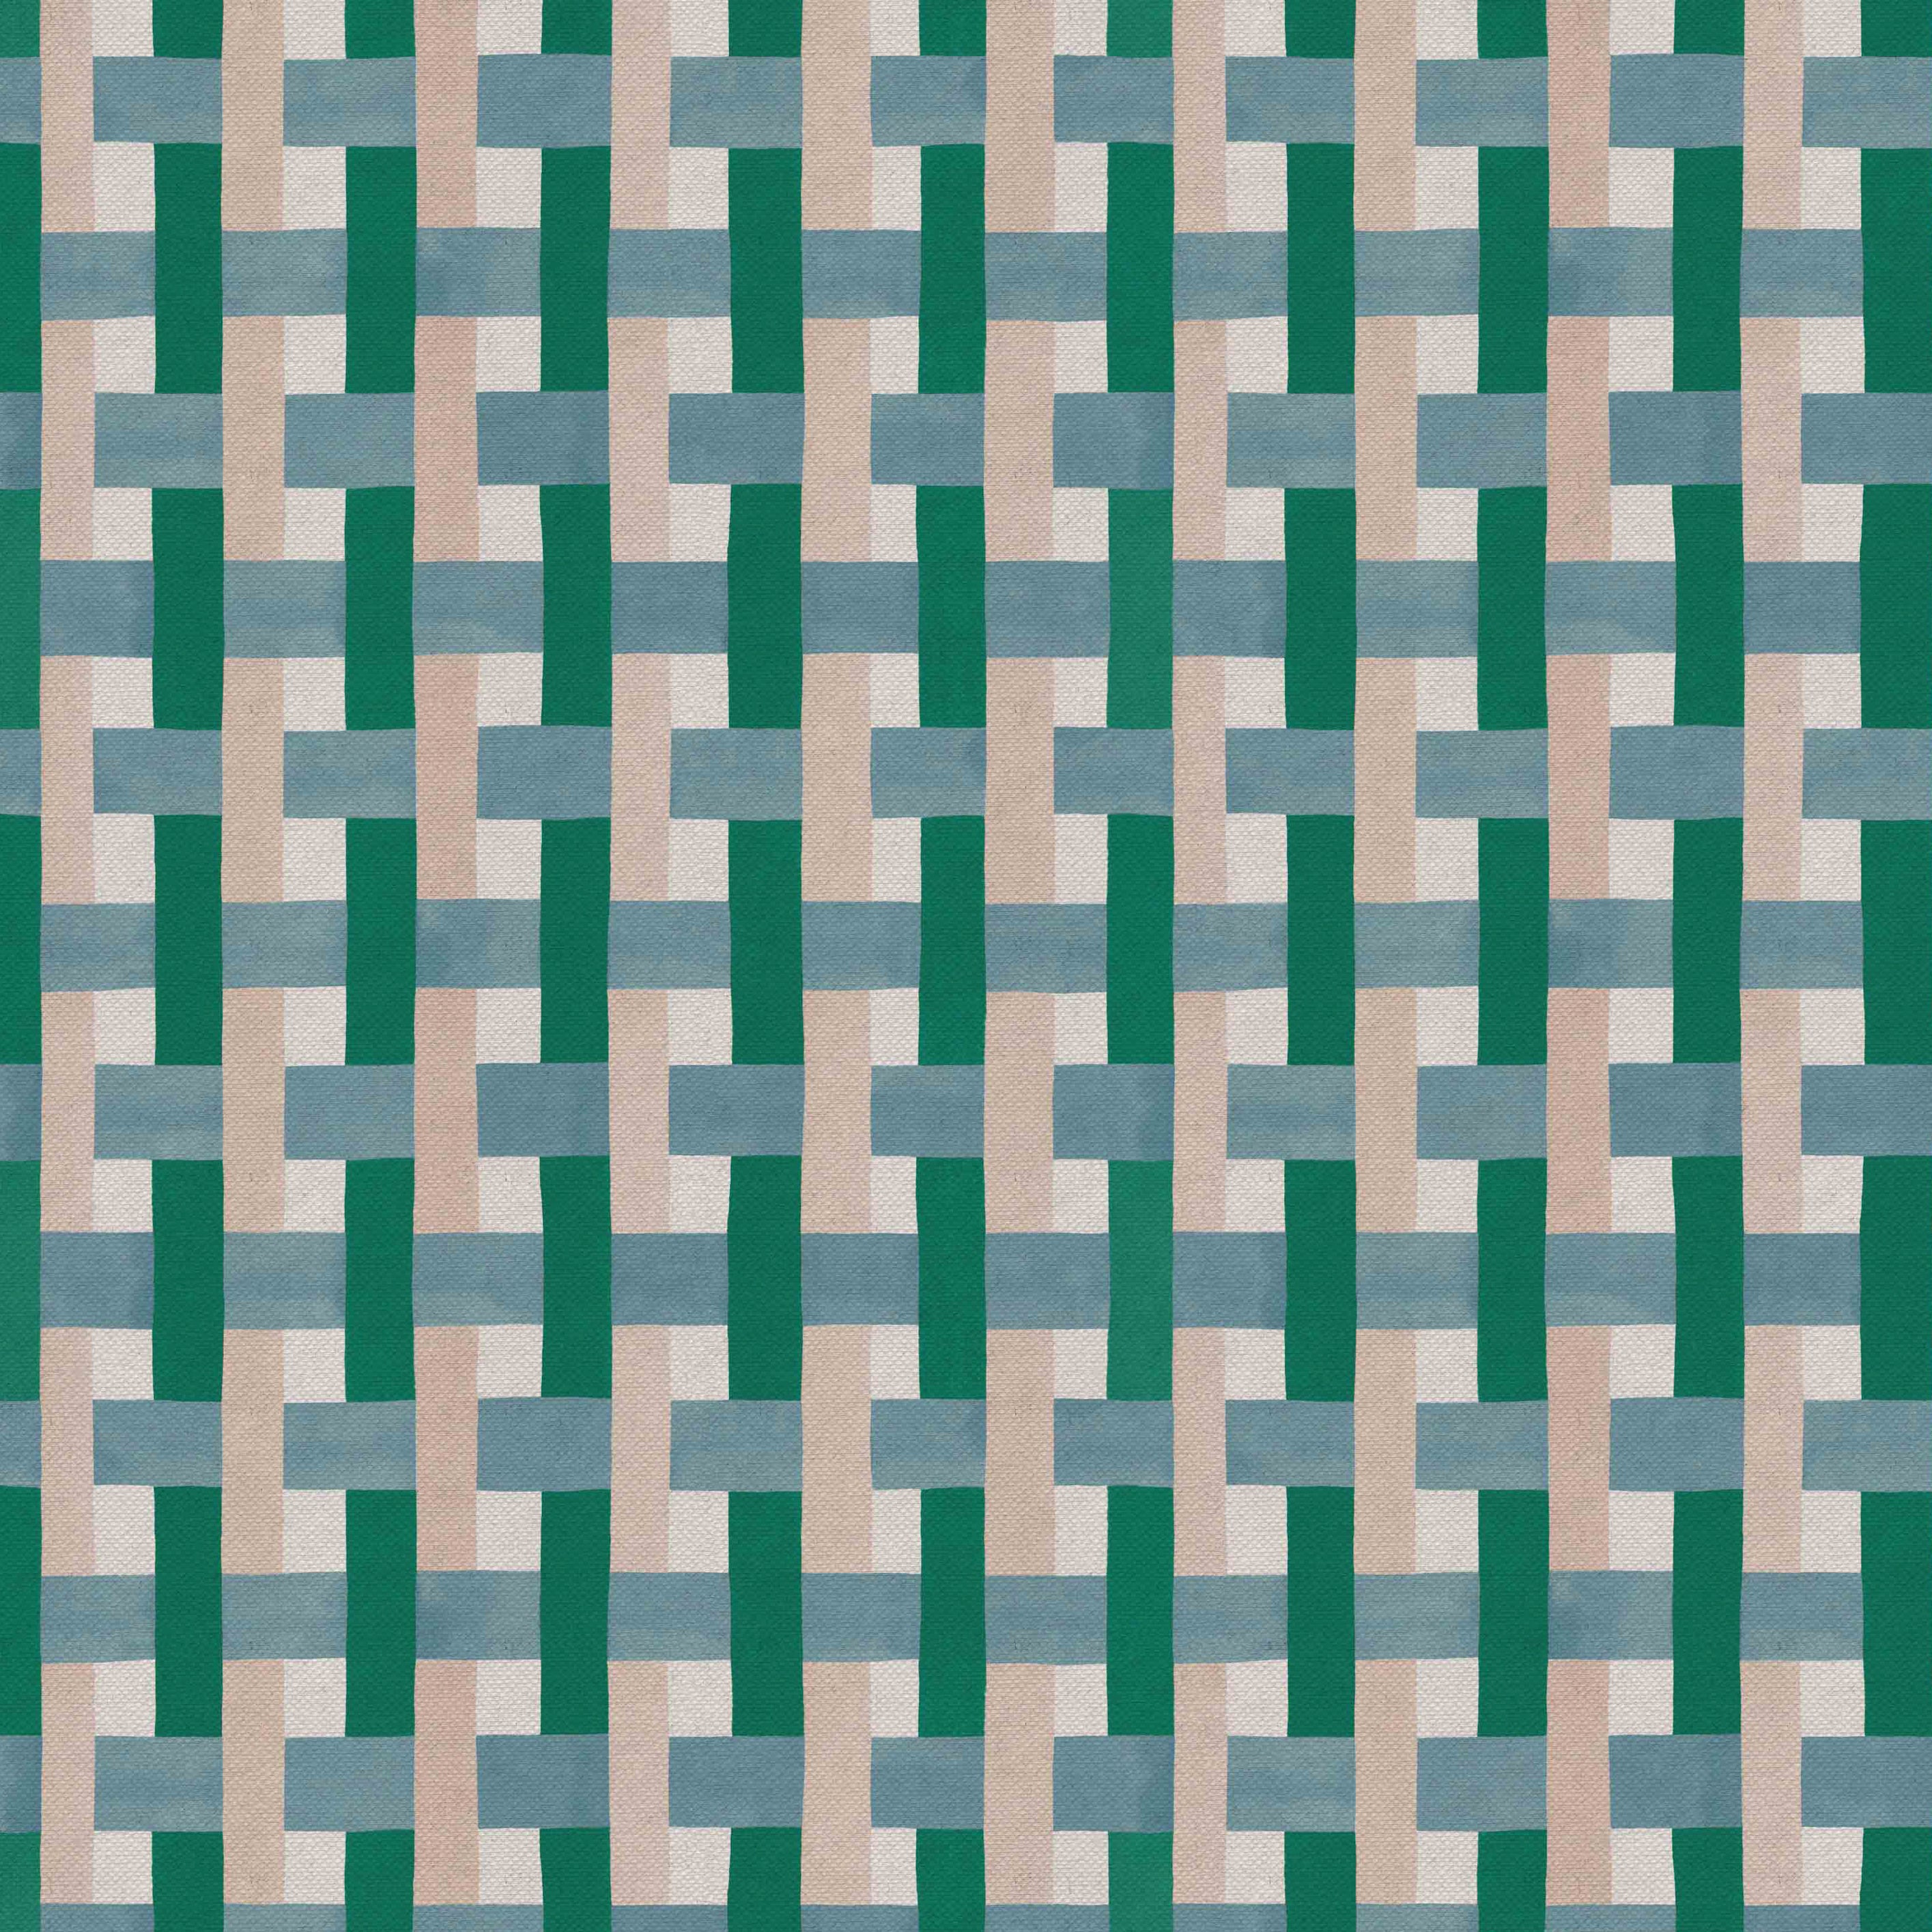 Detail of fabric in an interlocking checked pattern in shades of blue, green and pink.